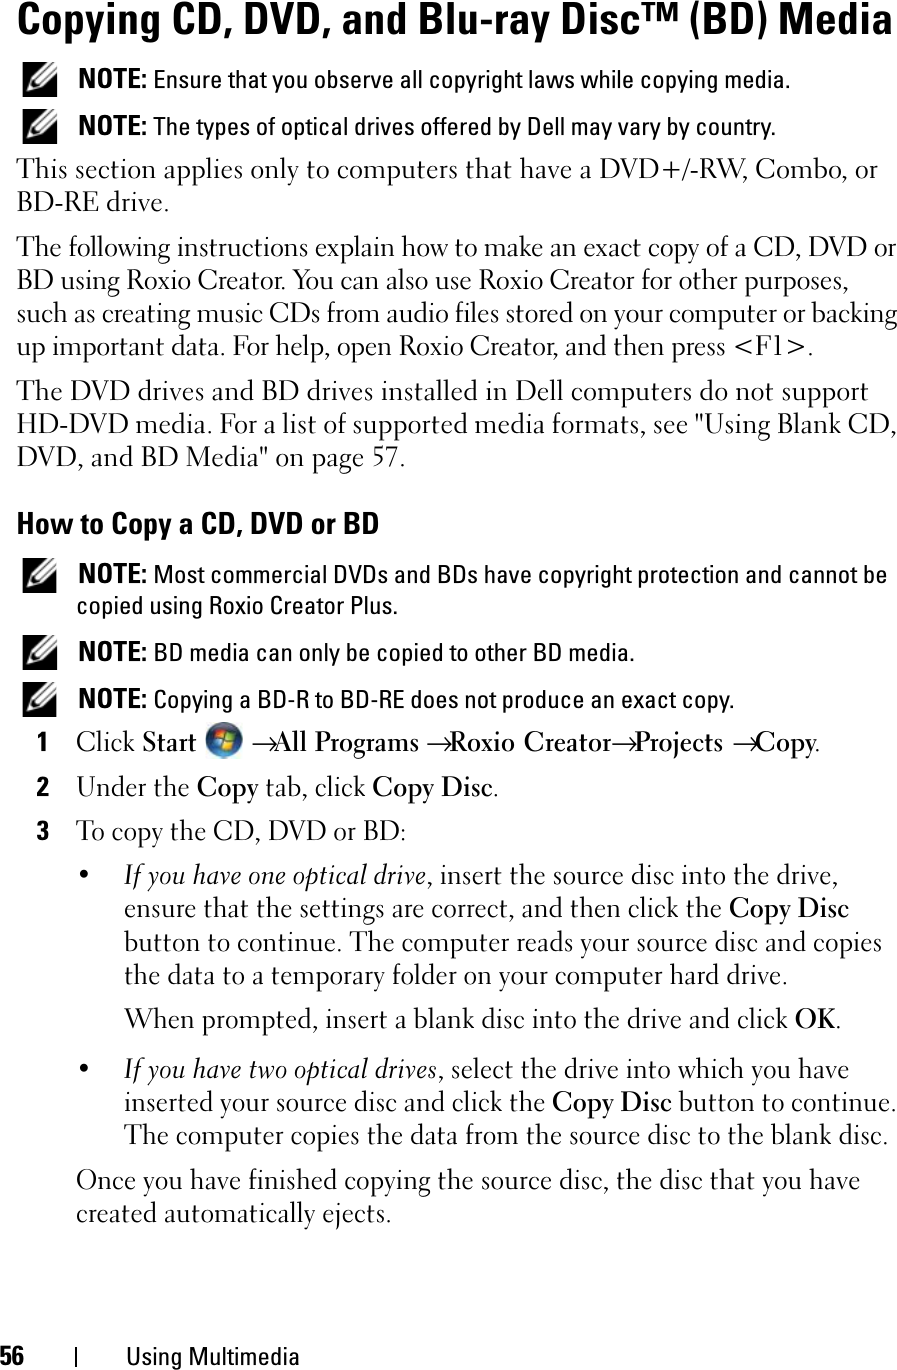 56 Using MultimediaCopying CD, DVD, and Blu-ray Disc™ (BD) MediaNOTE: Ensure that you observe all copyright laws while copying media.NOTE: The types of optical drives offered by Dell may vary by country.This section applies only to computers that have a DVD+/-RW, Combo, or BD-RE drive.The following instructions explain how to make an exact copy of a CD, DVD or BD using Roxio Creator. You can also use Roxio Creator for other purposes, such as creating music CDs from audio files stored on your computer or backing up important data. For help, open Roxio Creator, and then press &lt;F1&gt;.The DVD drives and BD drives installed in Dell computers do not support HD-DVD media. For a list of supported media formats, see &quot;Using Blank CD, DVD, and BD Media&quot; on page 57.How to Copy a CD, DVD or BDNOTE: Most commercial DVDs and BDs have copyright protection and cannot be copied using Roxio Creator Plus.NOTE: BD media can only be copied to other BD media.NOTE: Copying a BD-R to BD-RE does not produce an exact copy.1ClickStart →All Programs → Roxio Creator→Projects →Copy.2Under the Copytab, click Copy Disc.3To copy the CD, DVD or BD:•If you have one optical drive, insert the source disc into the drive, ensure that the settings are correct, and then click the Copy Disc button to continue. The computer reads your source disc and copies the data to a temporary folder on your computer hard drive.When prompted, insert a blank disc into the drive and click OK.•If you have two optical drives, select the drive into which you have inserted your source disc and click the Copy Disc button to continue. The computer copies the data from the source disc to the blank disc.Once you have finished copying the source disc, the disc that you have created automatically ejects.